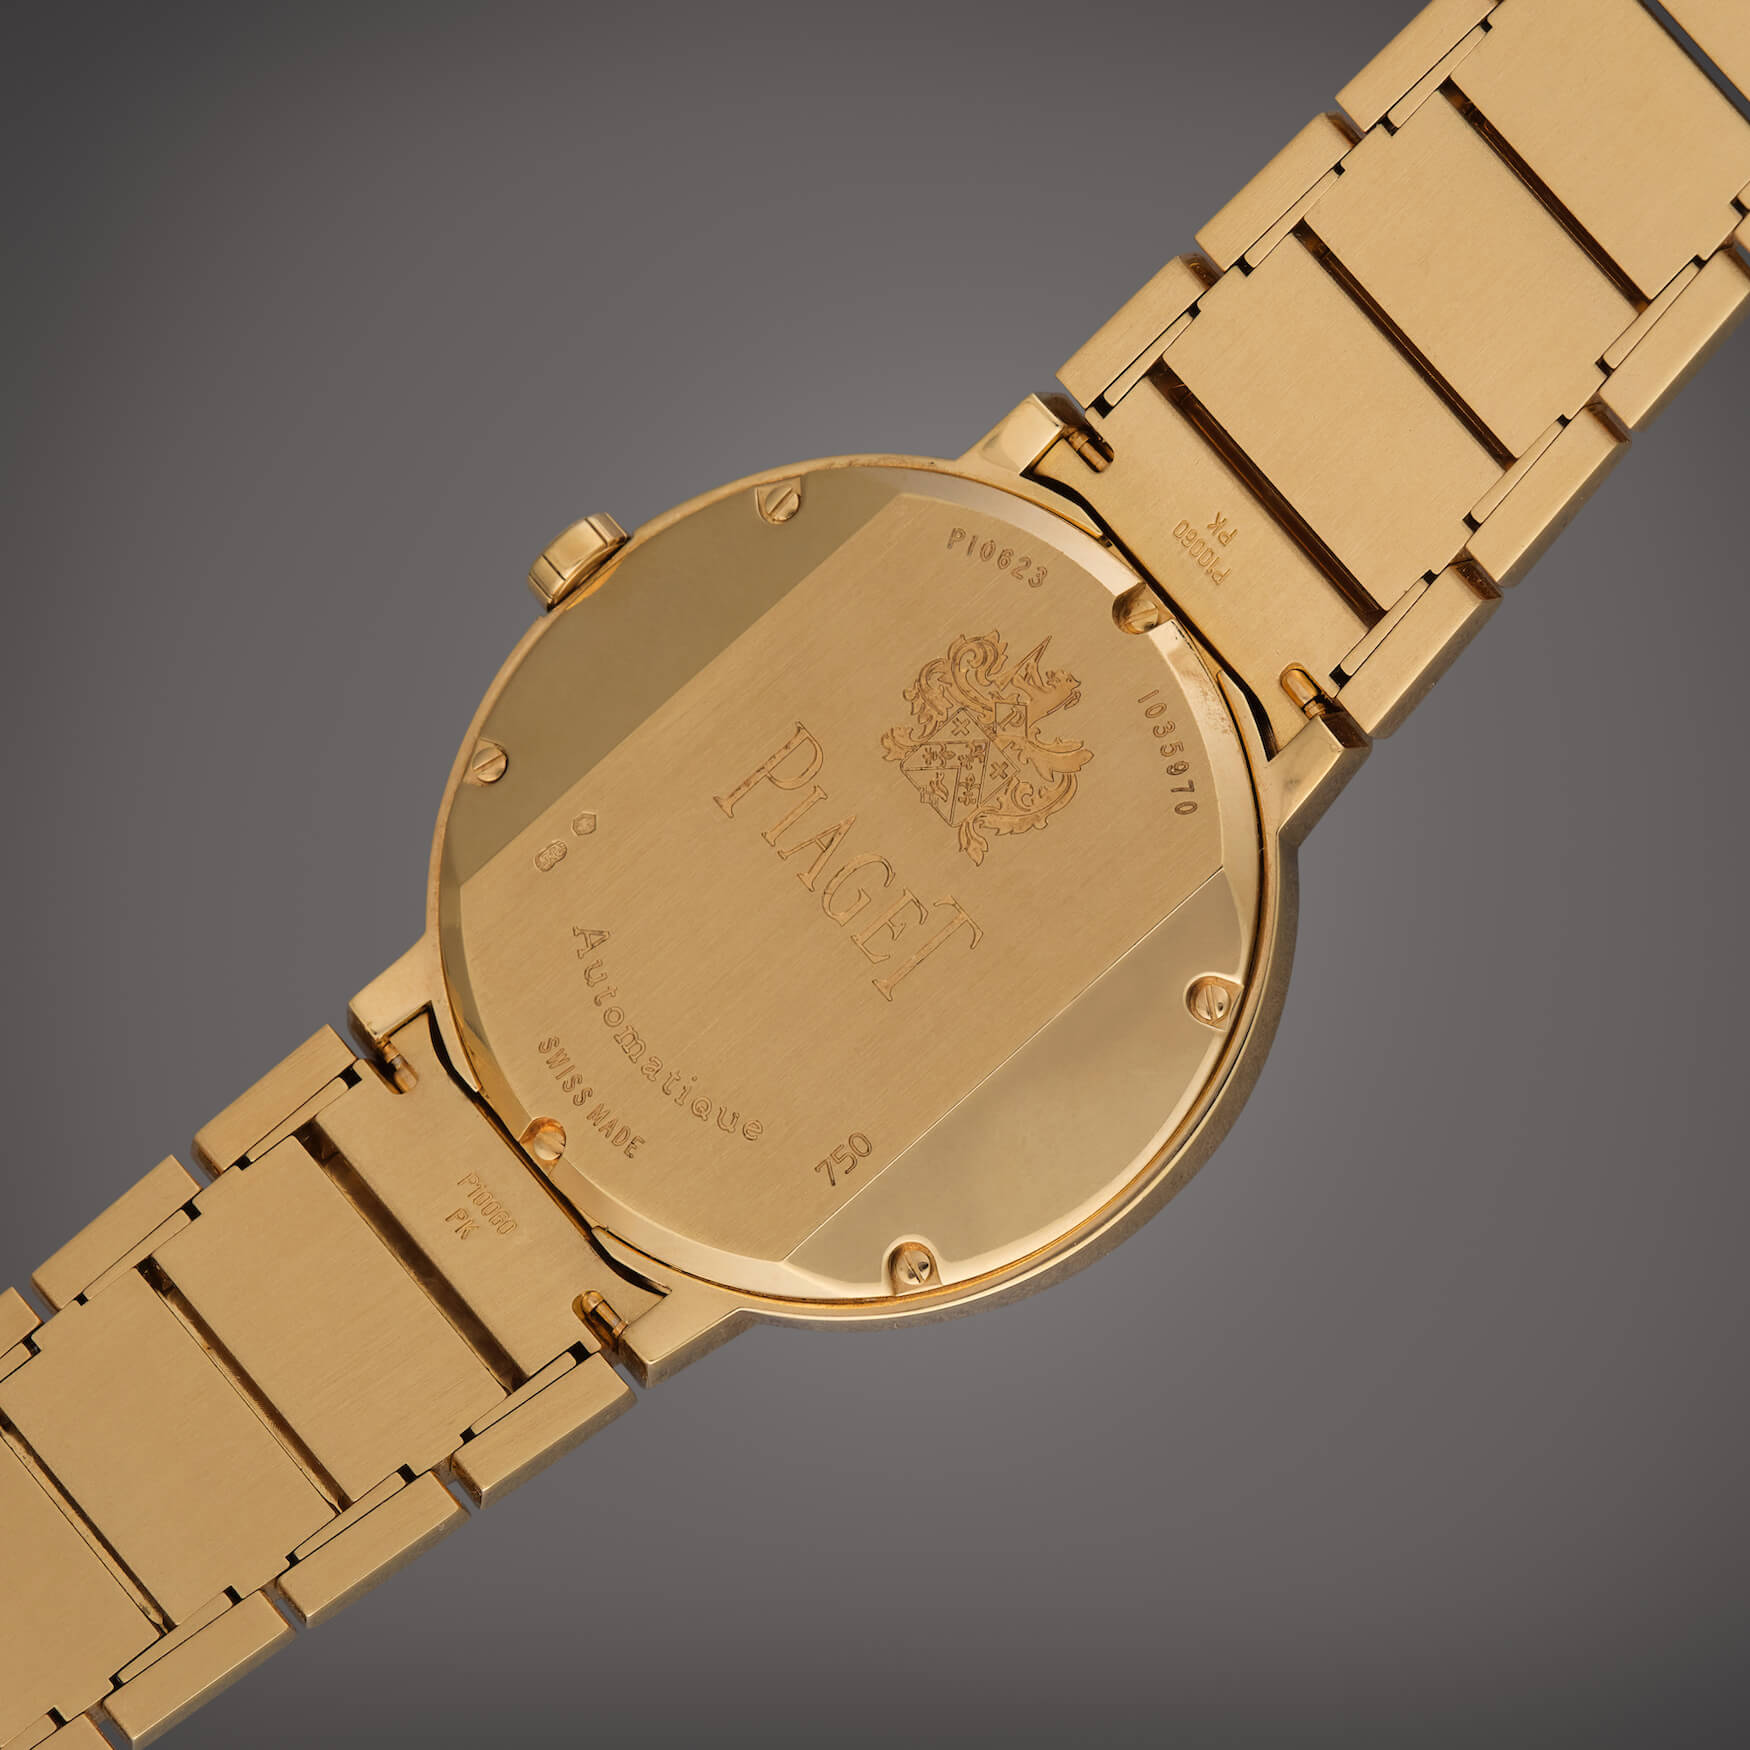 Piaget Reference P10623 Polo Grande back